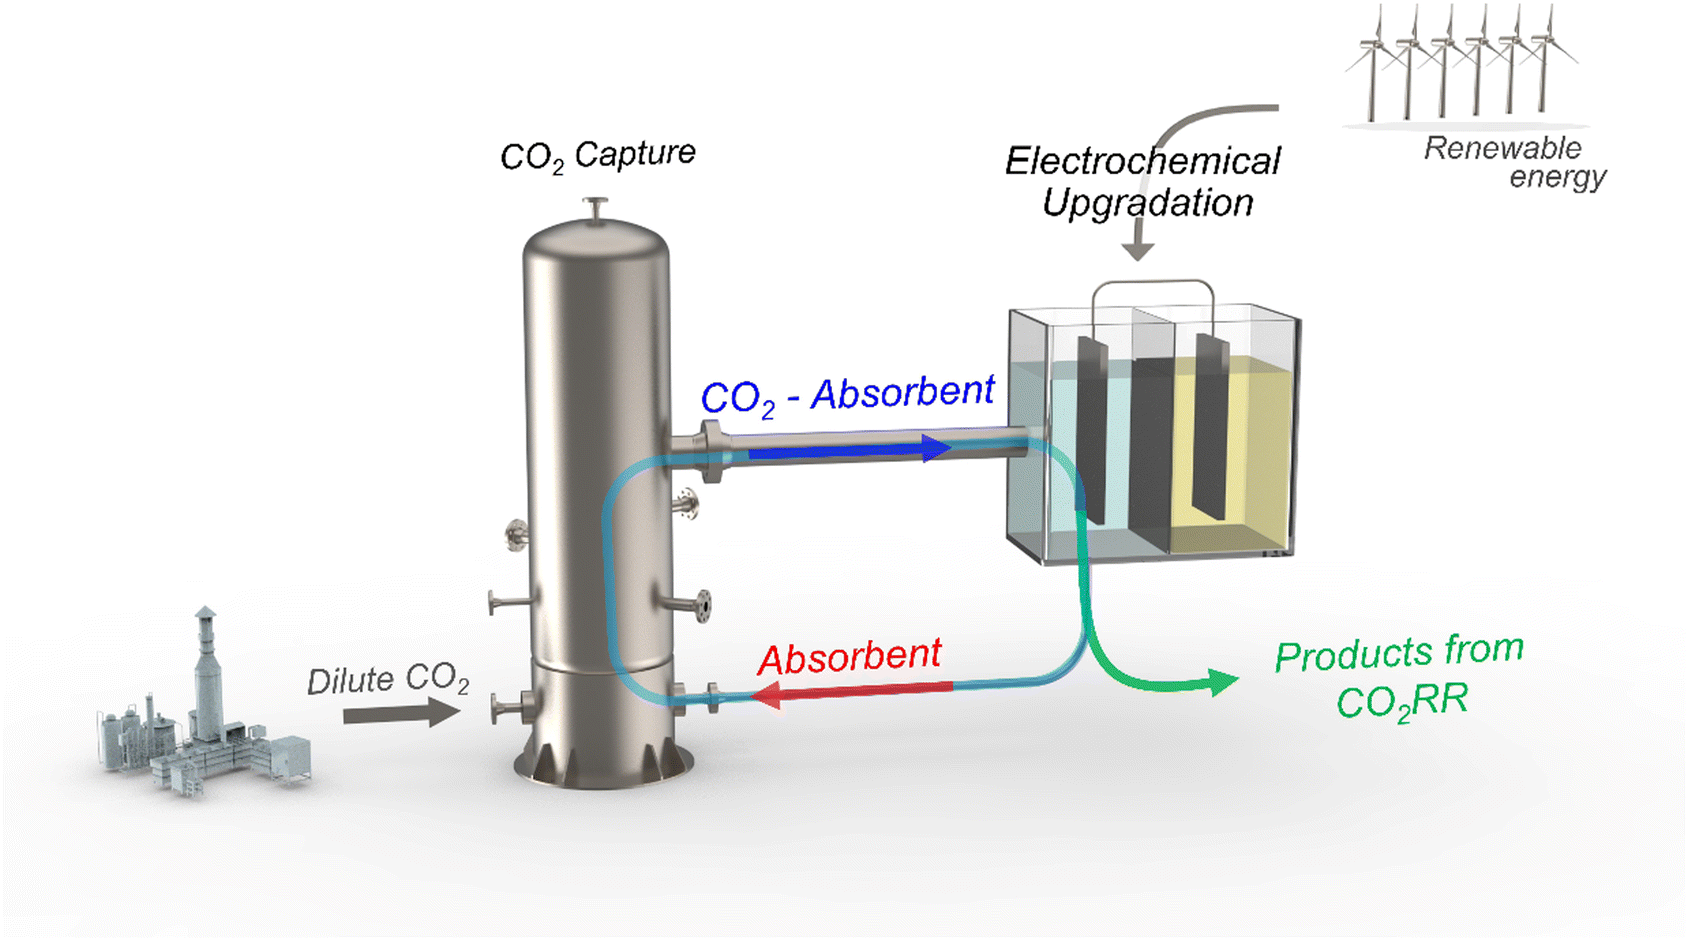 Integrated CO 2 capture and electrochemical upgradation: the